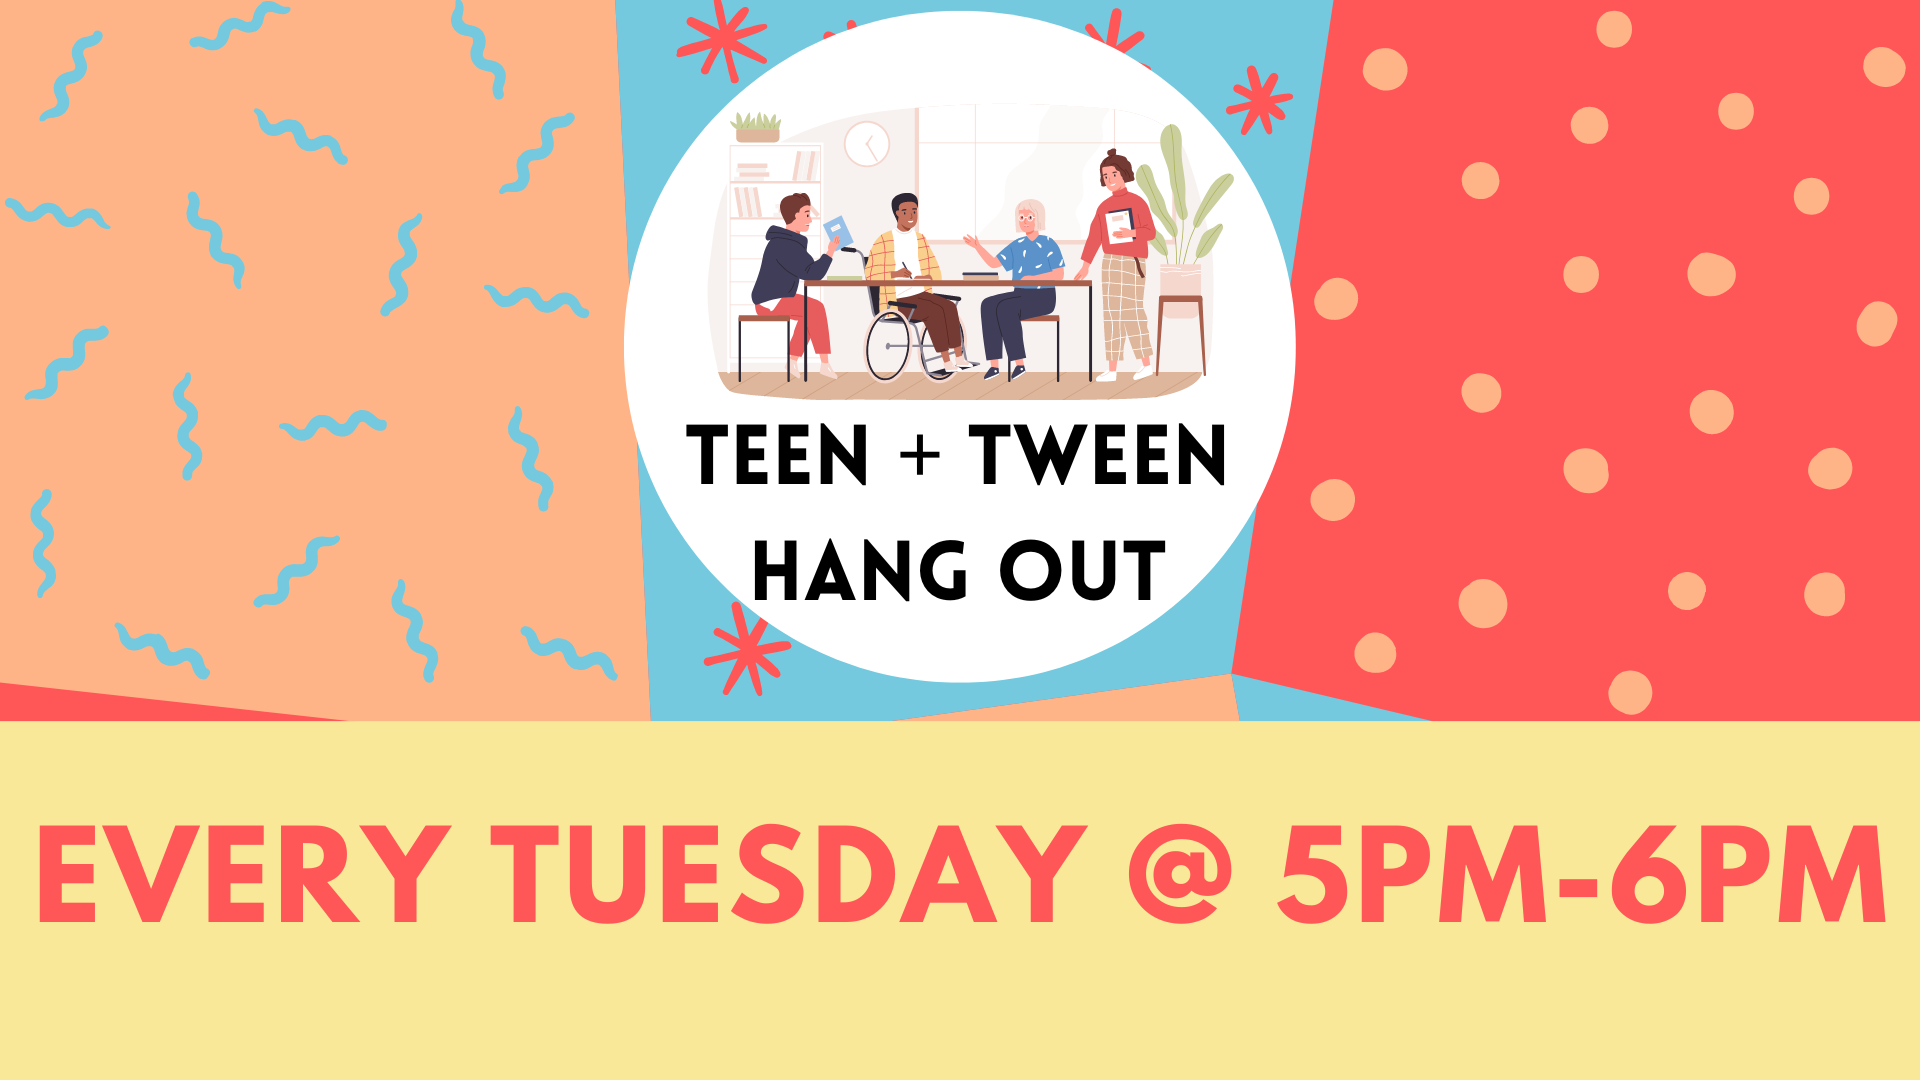 Teen + Tween hang out every Tuesday @ 5pm-6pm